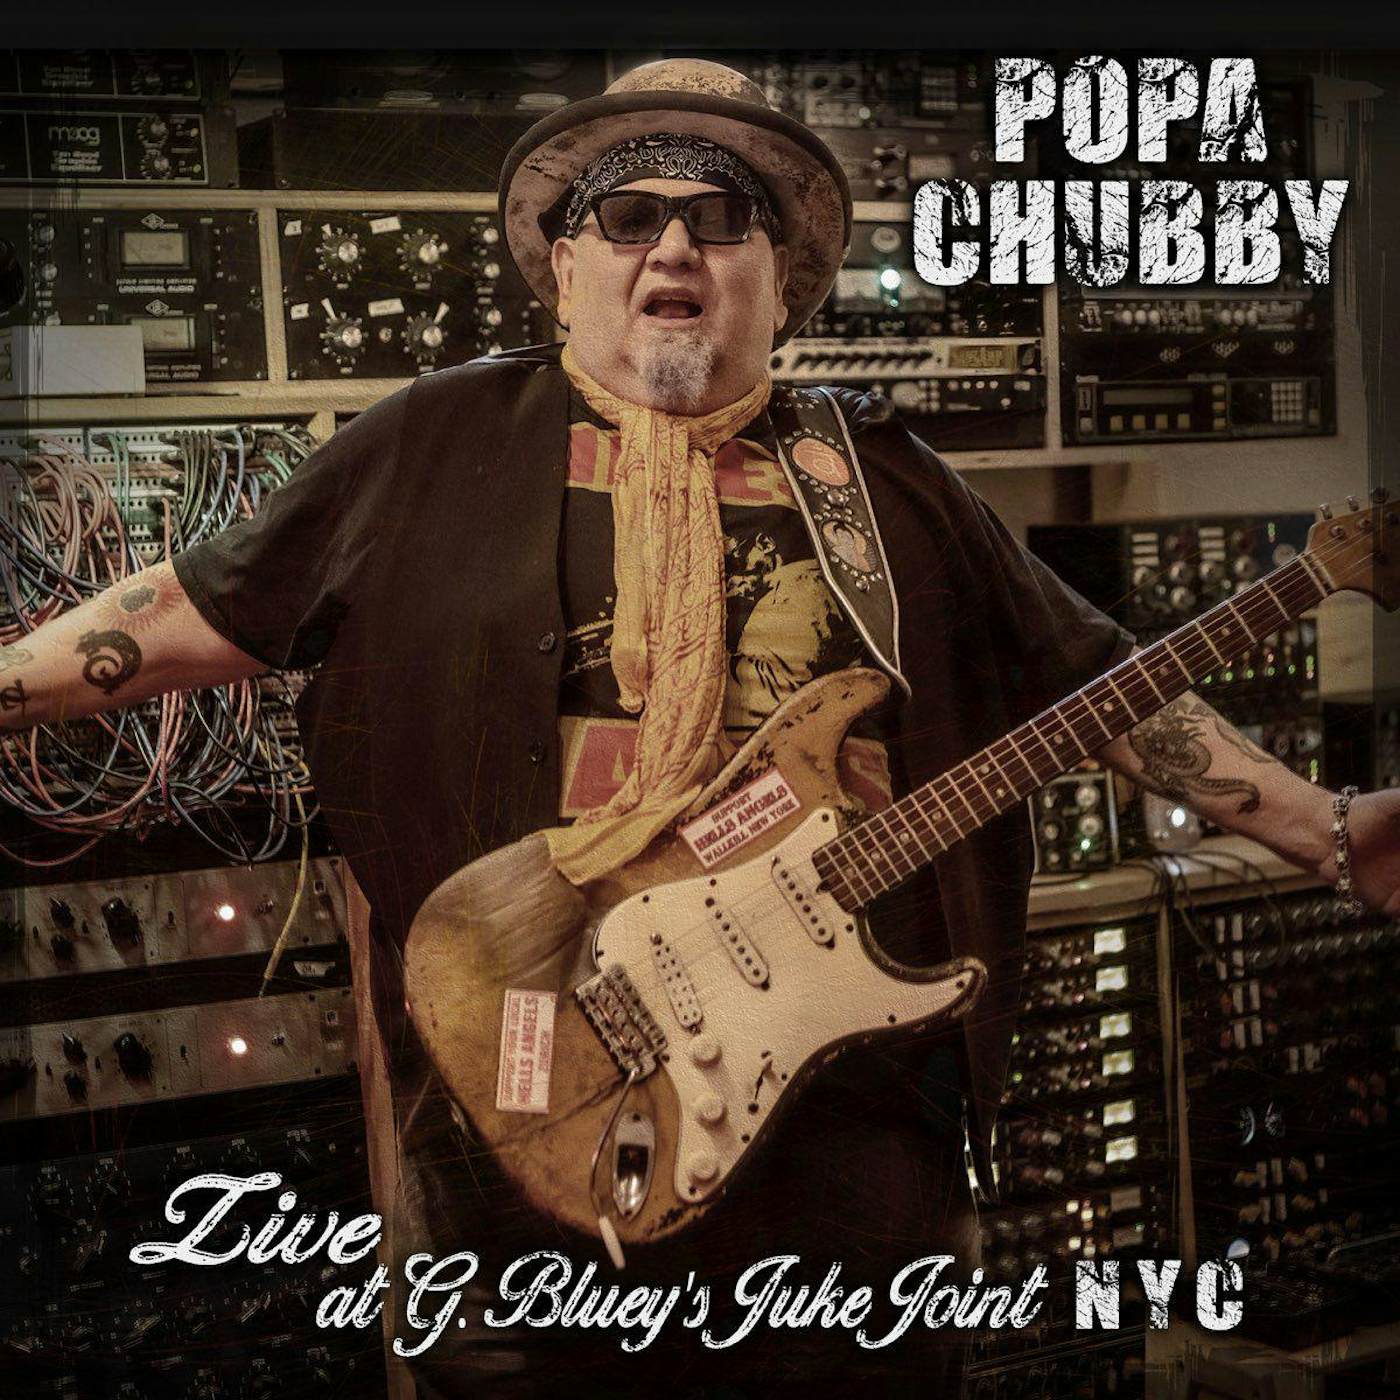 Popa Chubby LIVE AT G. BLUEY'S JUKE JOINT N.Y.C. Vinyl Record